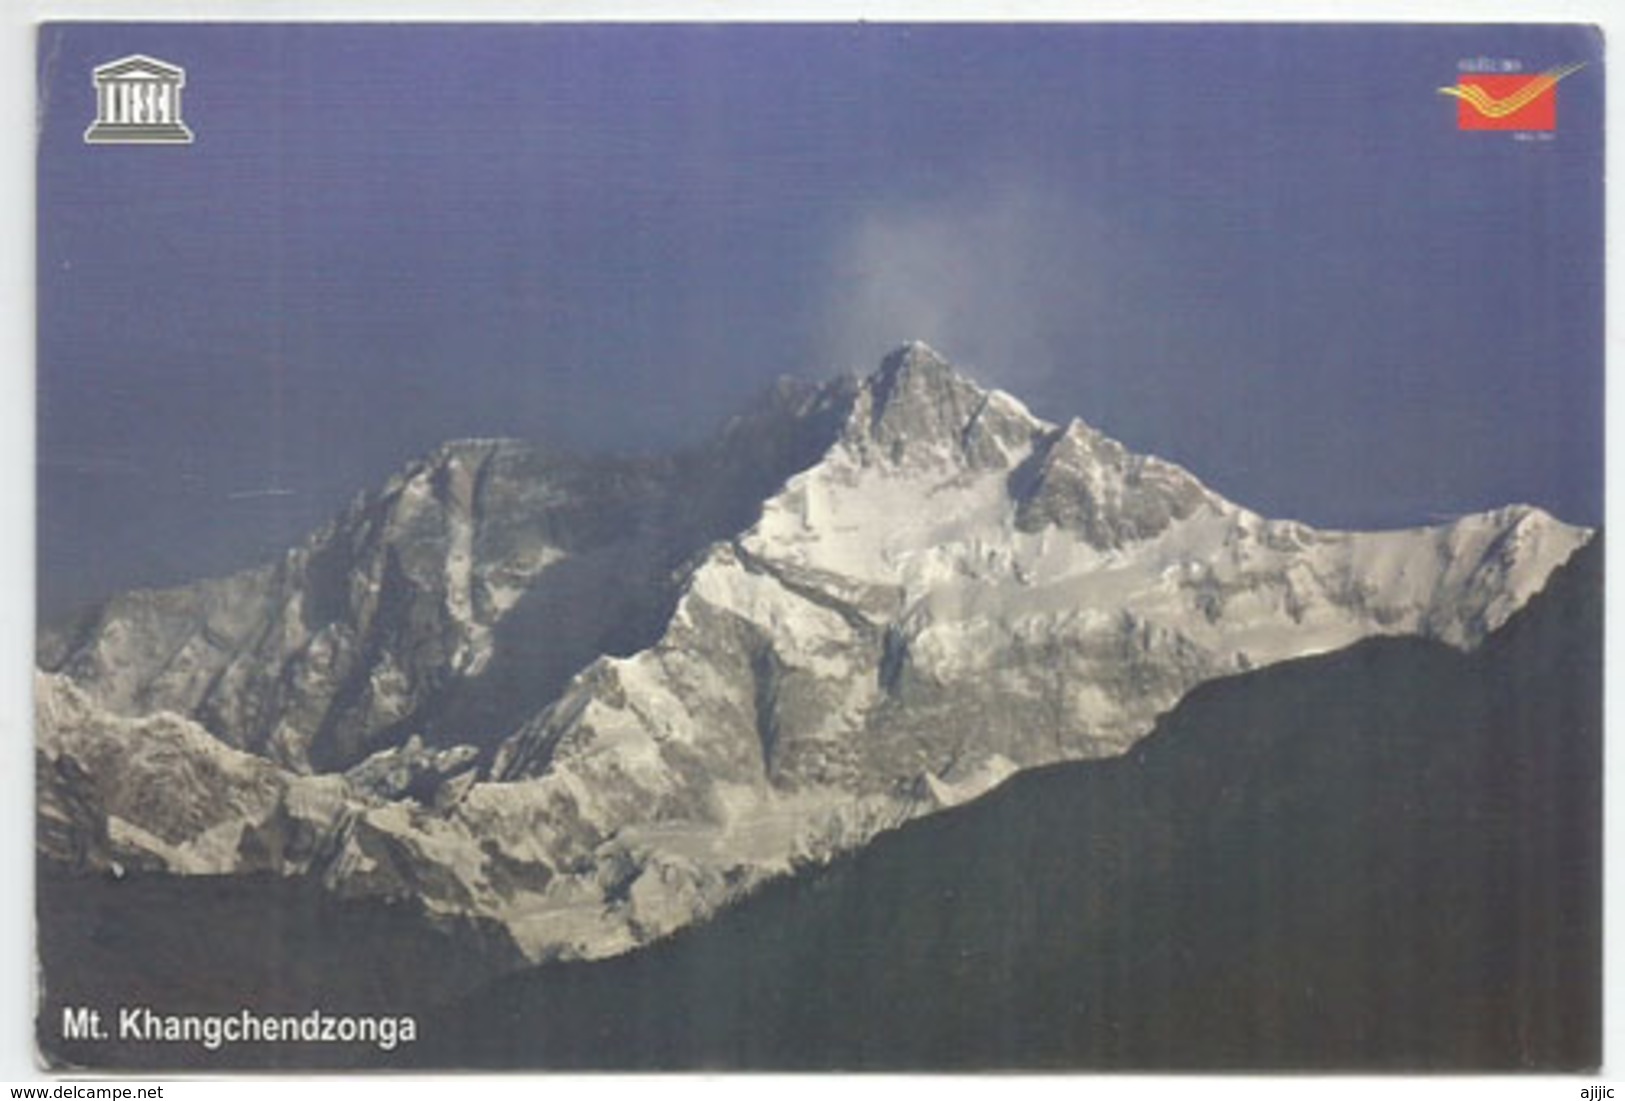 Mt.Kangchenjunga,8586 M, Third Highest Mountain In The World, Postcard Addressed To ANDORRA,with Arrival Postmark - Alpinisme